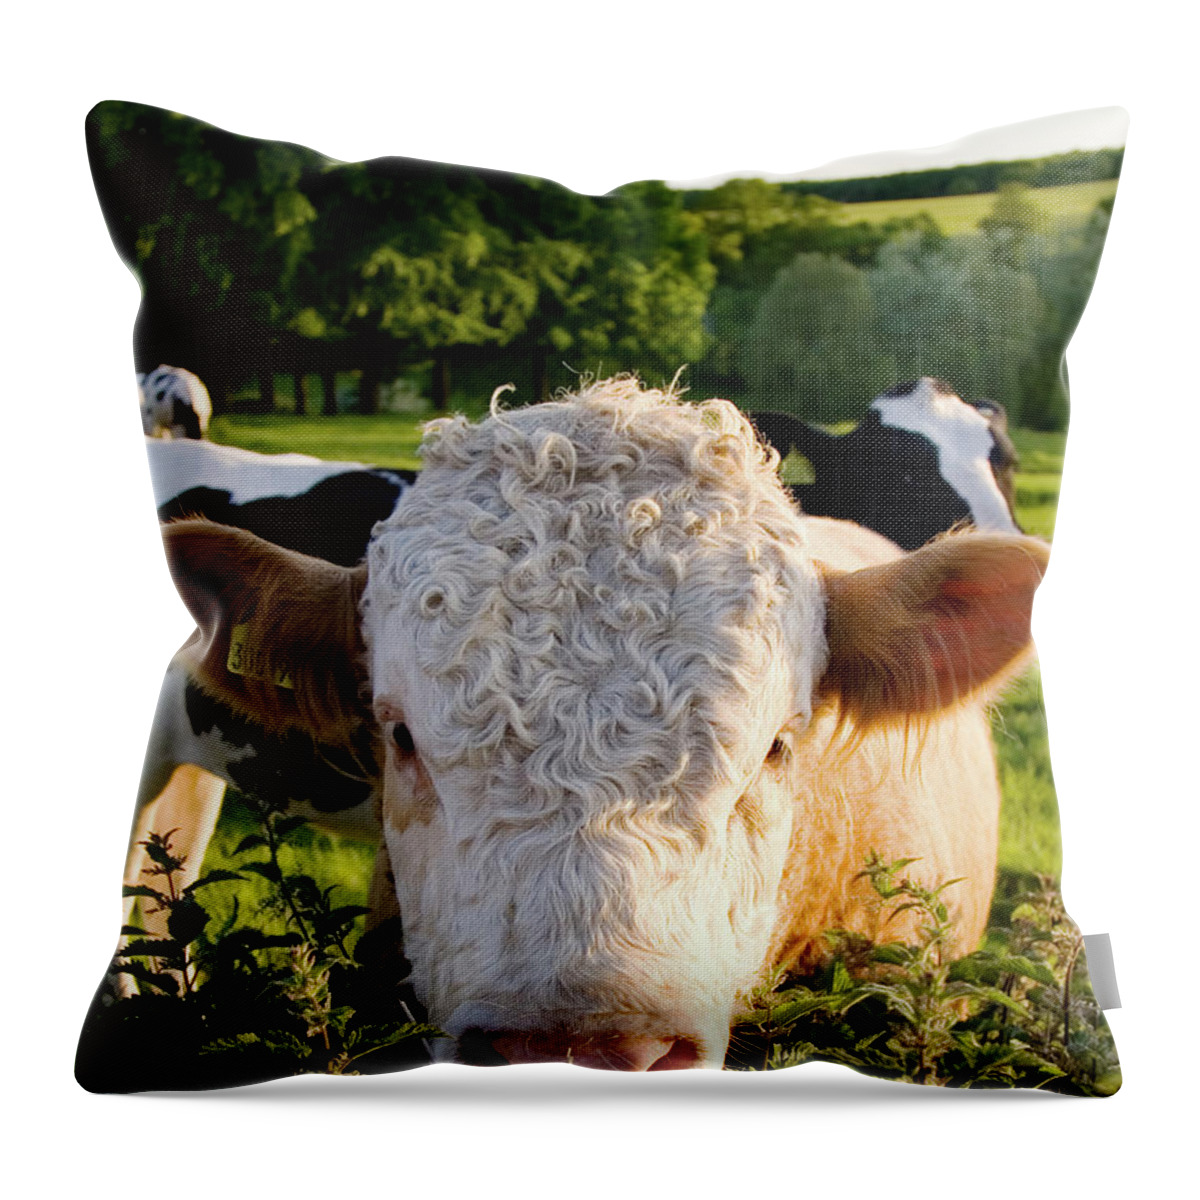 Animal Nose Throw Pillow featuring the photograph Bull, The Cotswolds, Uk by Tim Graham